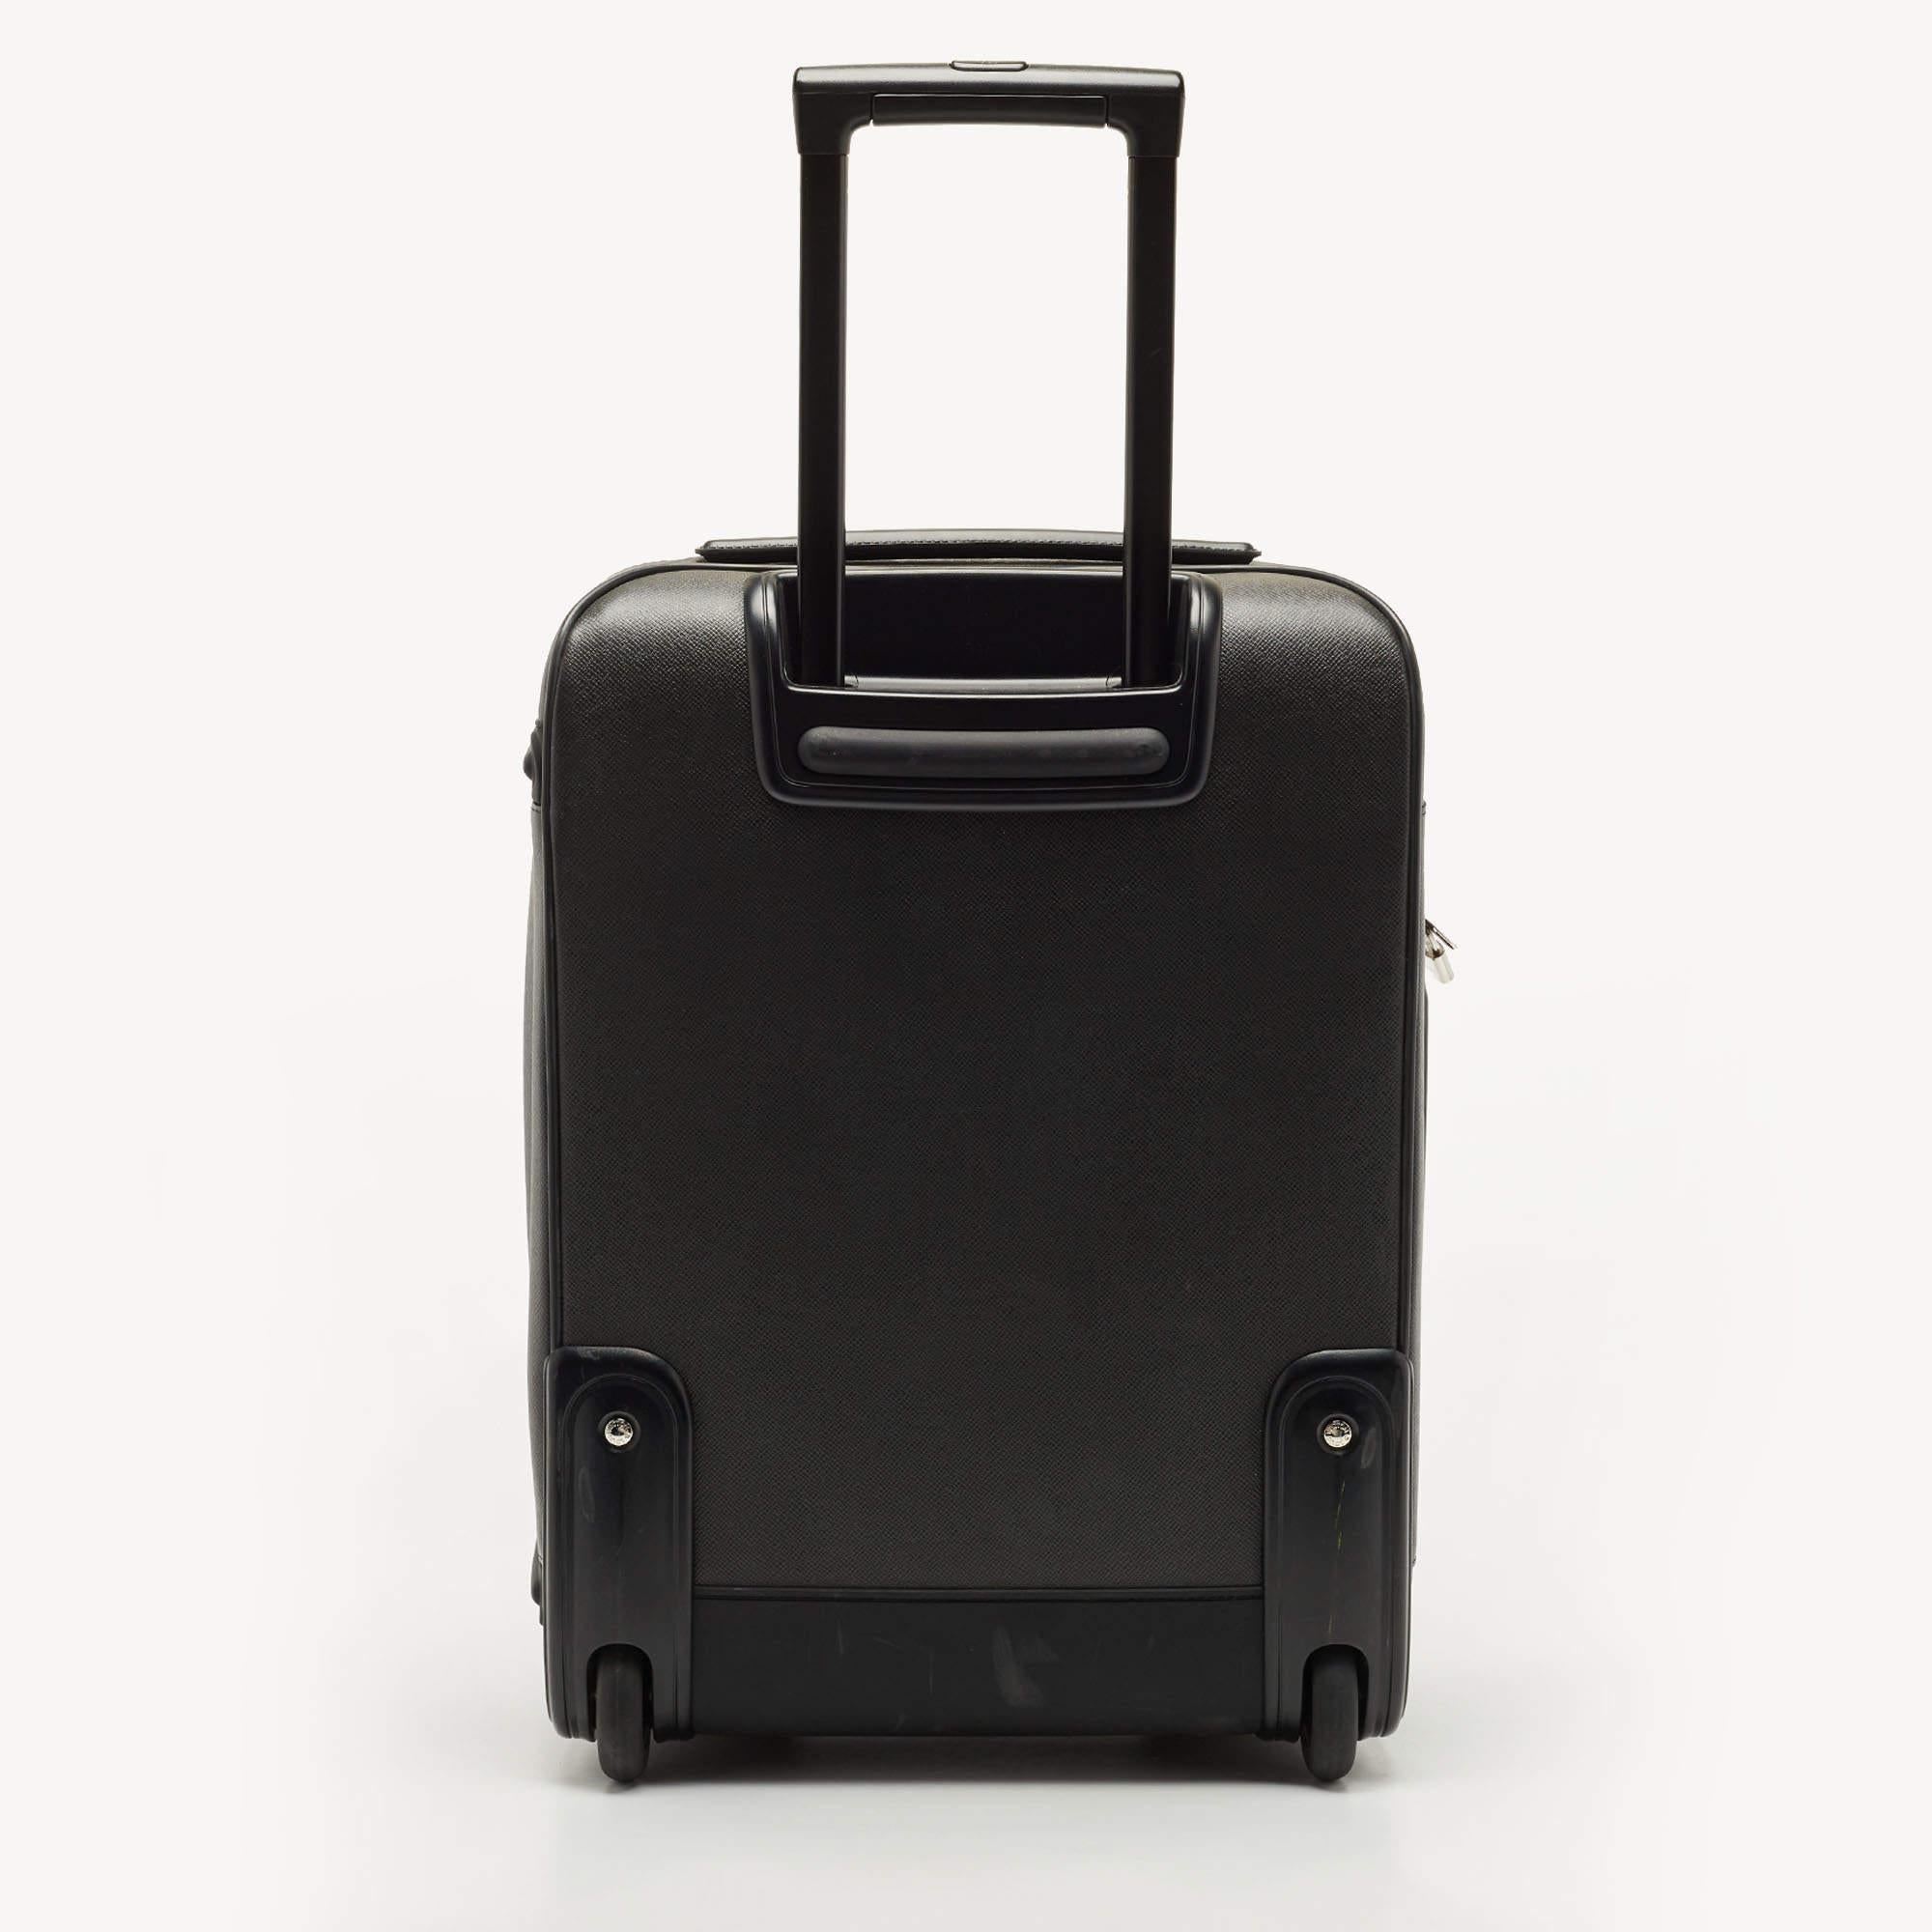 Travel to the places your heart desires with this Louis Vuitton Pegase Legere 55 Business suitcase. Constructed using Taiga leather, the case has all the right details to be a travel essential.

Includes: 2 Padlock(no keys)